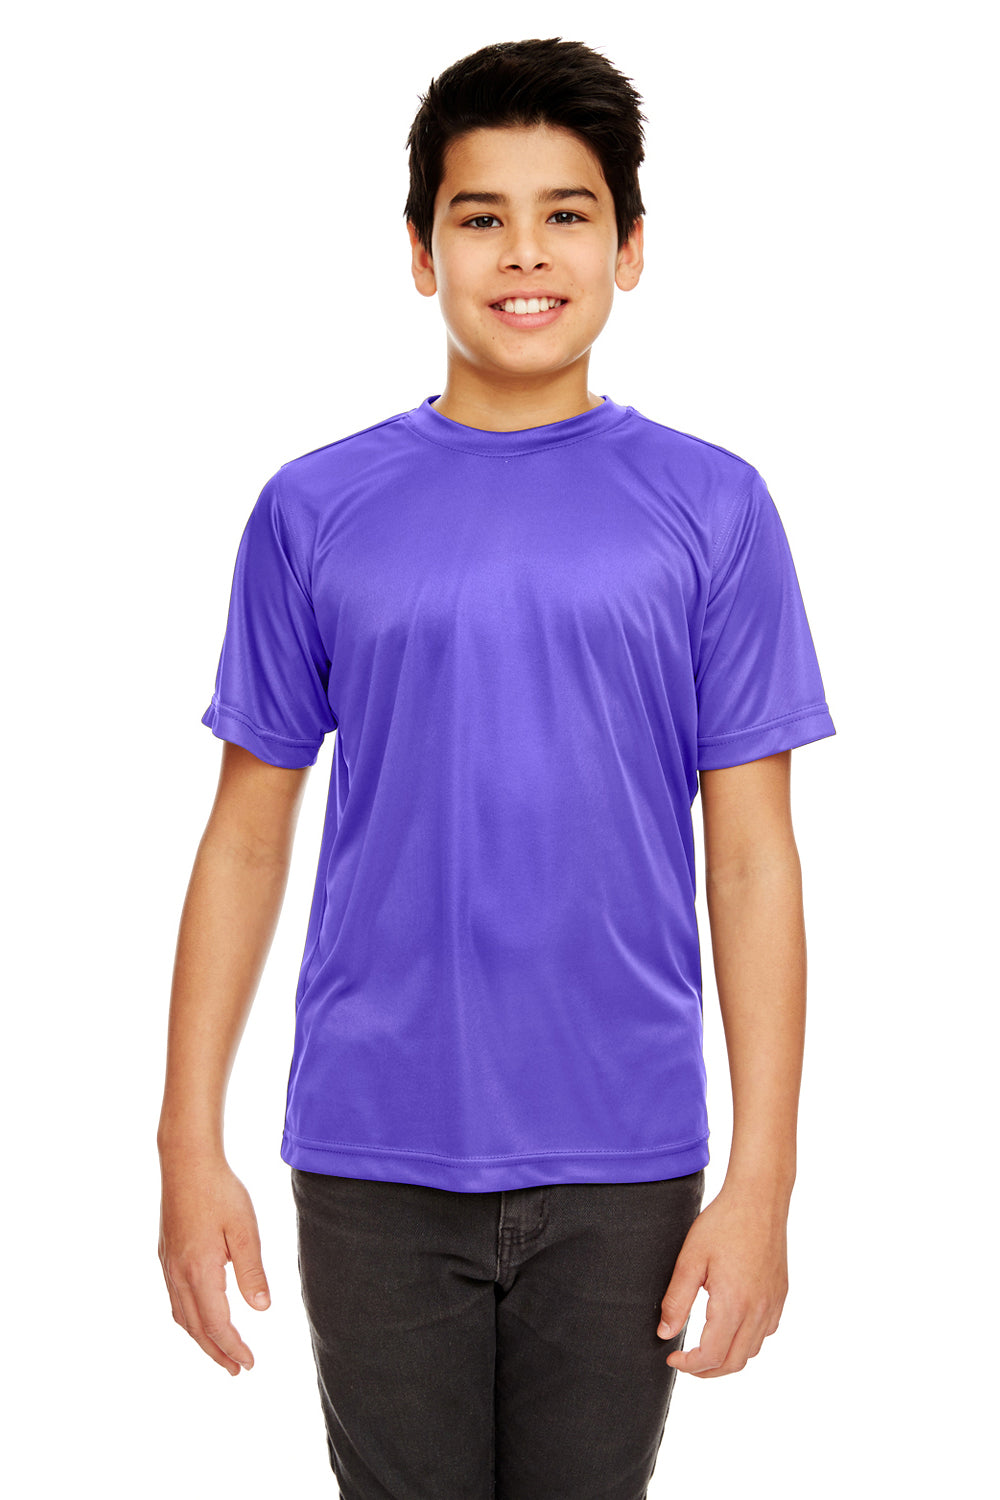 UltraClub 8420Y Youth Cool & Dry Performance Moisture Wicking Short Sleeve Crewneck T-Shirt Purple Front